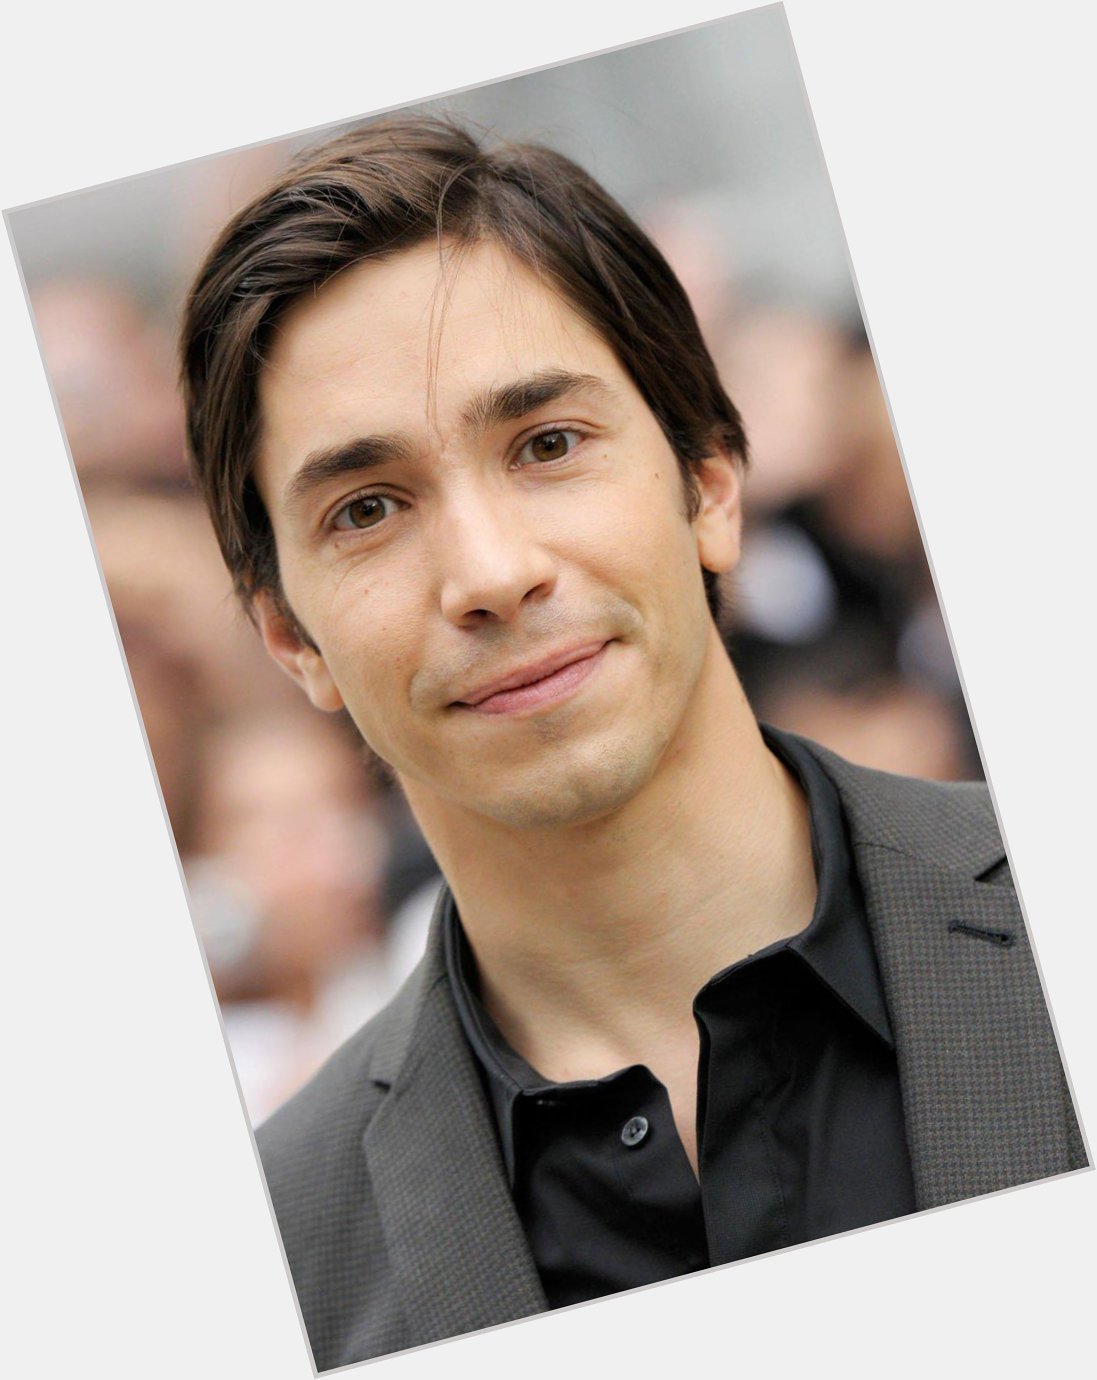 Happy Birthday to Justin Long, who turns 37 today! 